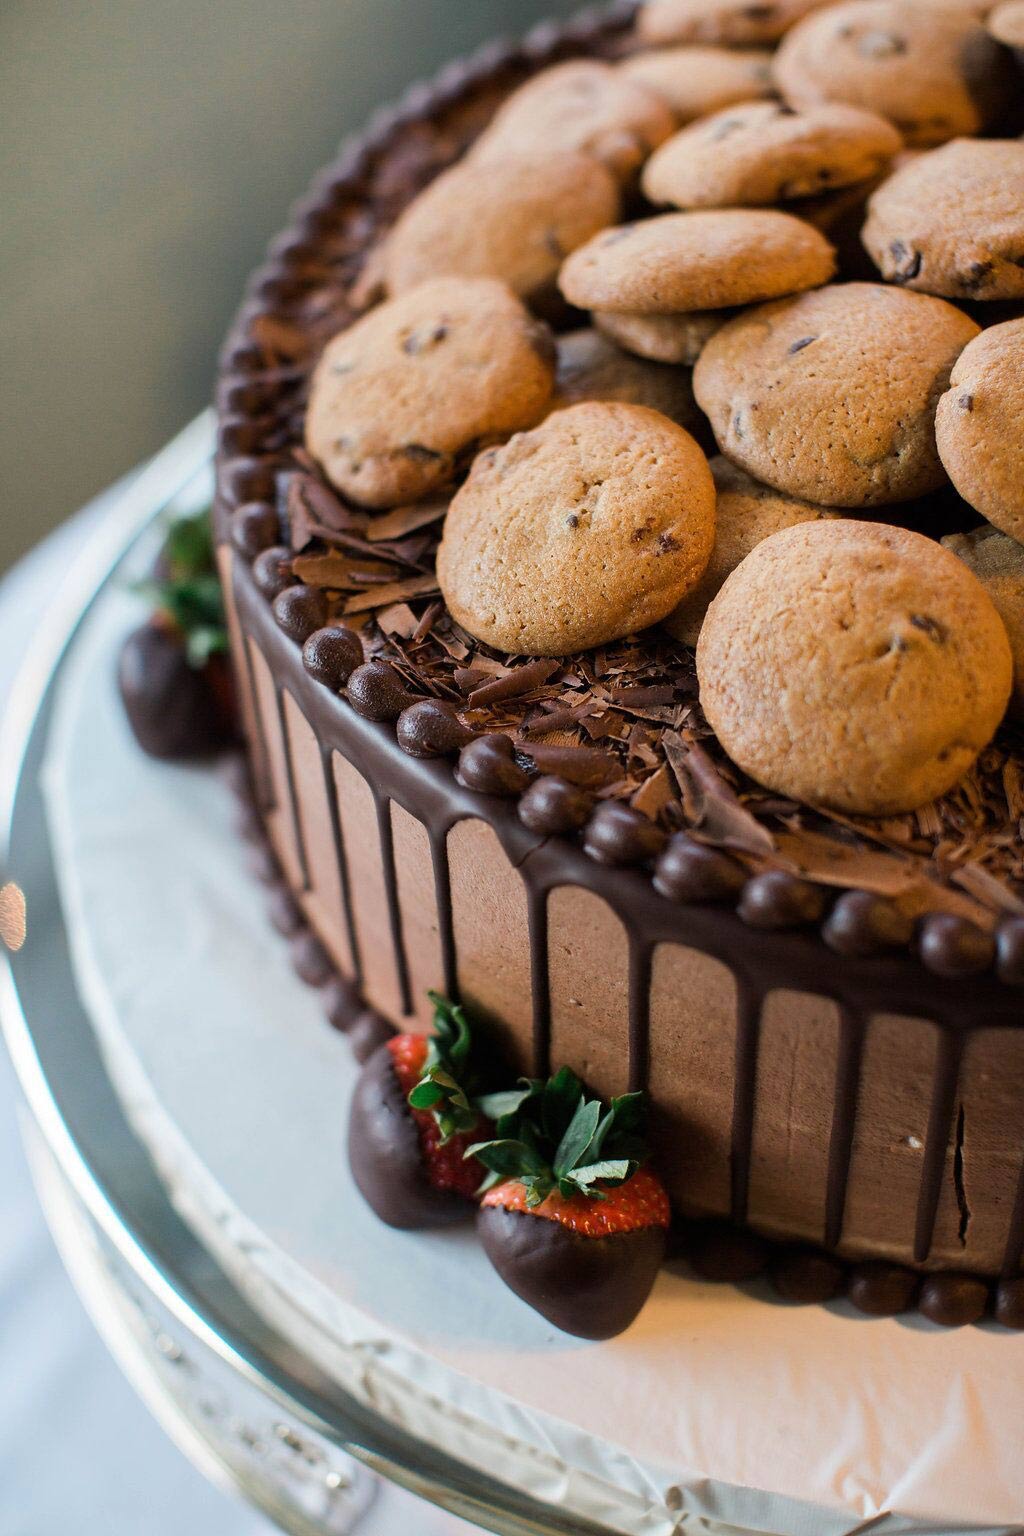 Chocolate grooms cake with cookies on top